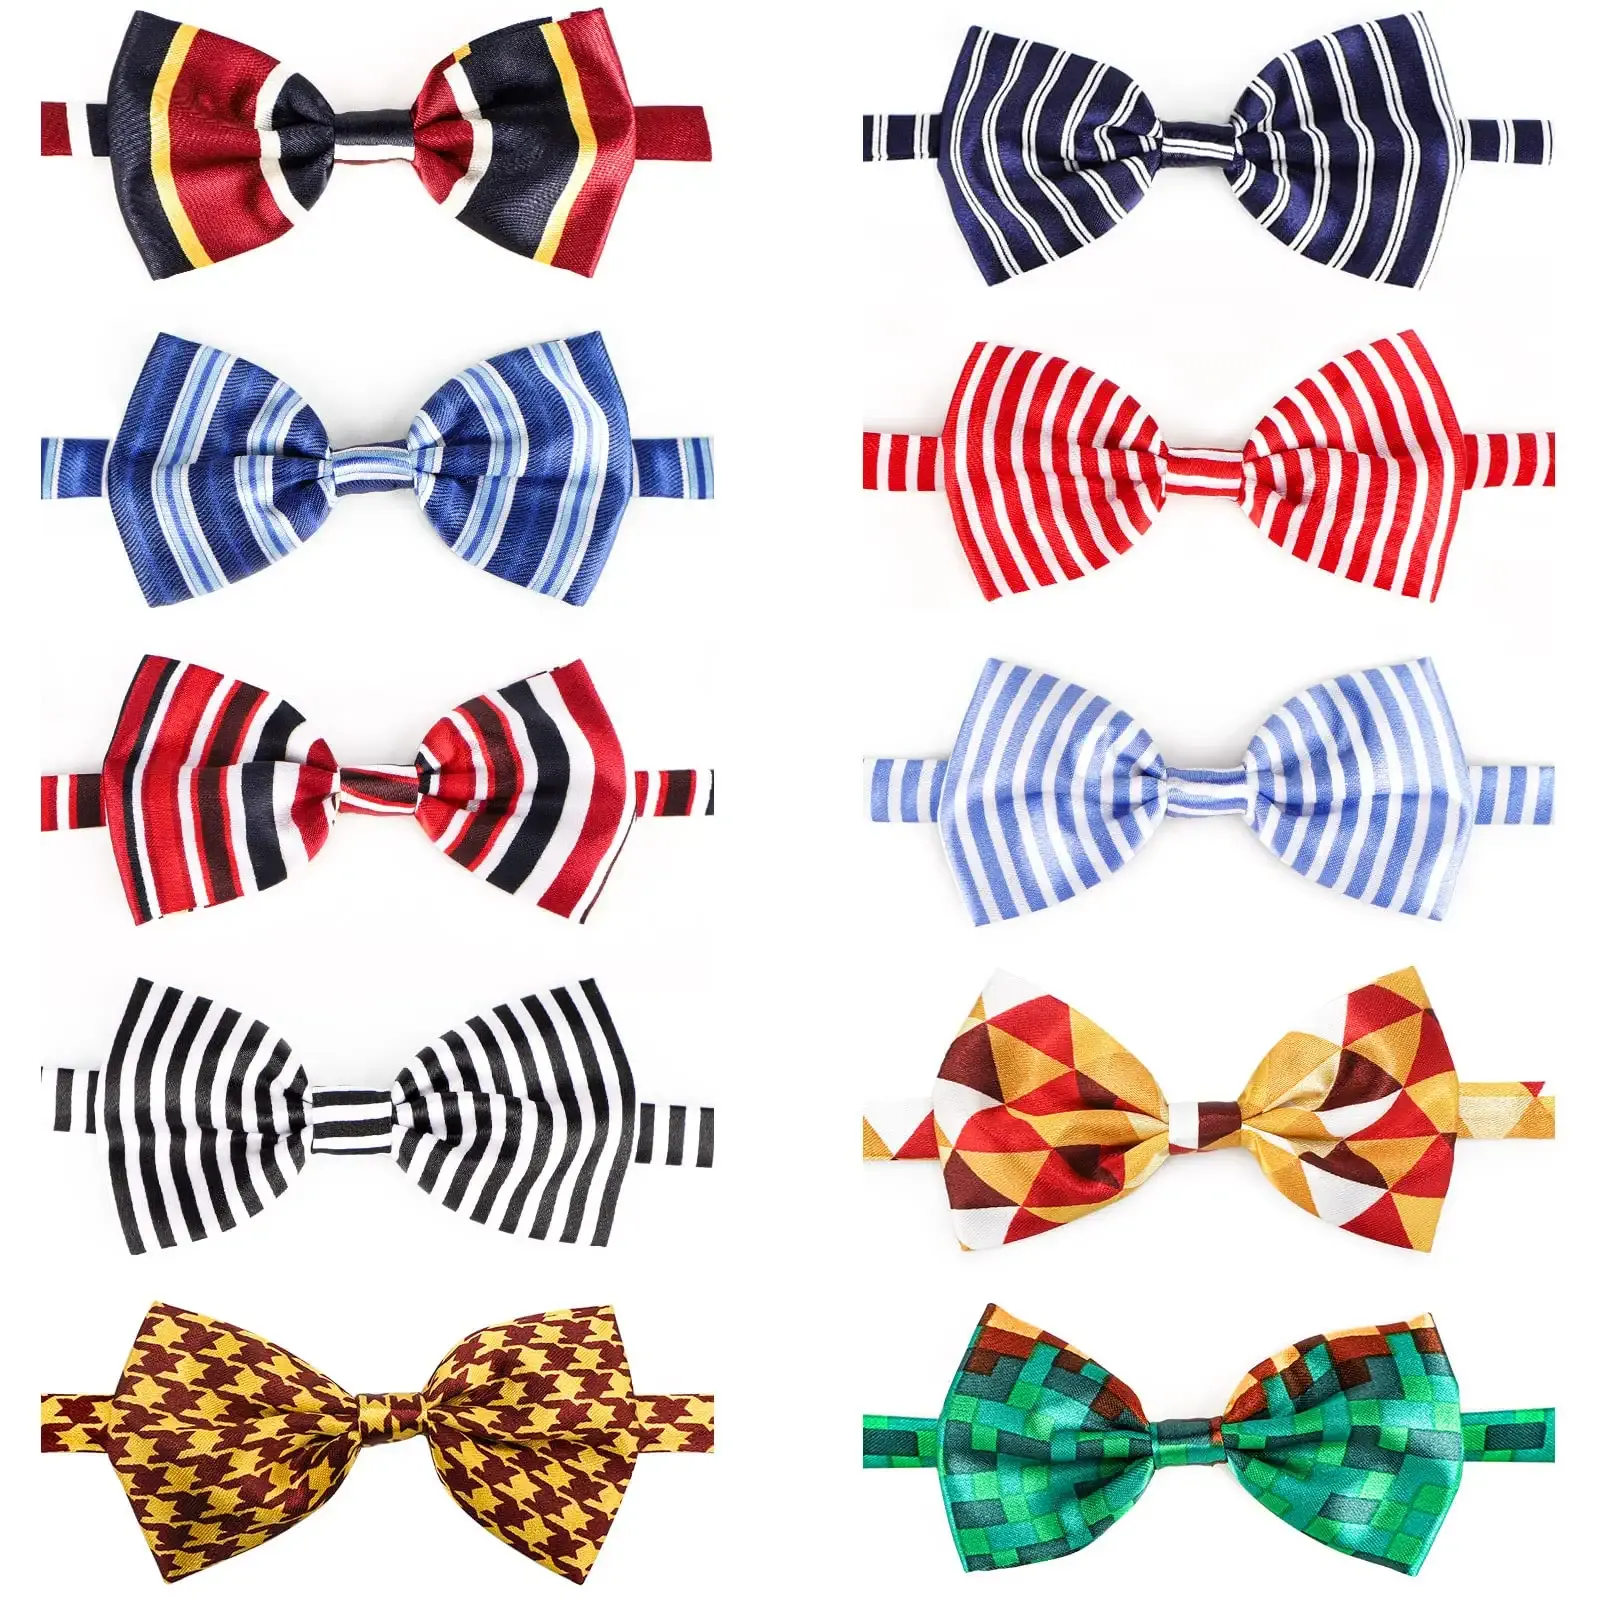 3ml pet dog bow ties collar adjustable cat bow ties neck bows bulk pet bowties mix solid pet collars accessories for small medium dog cat pets christmas birthday holiday photography